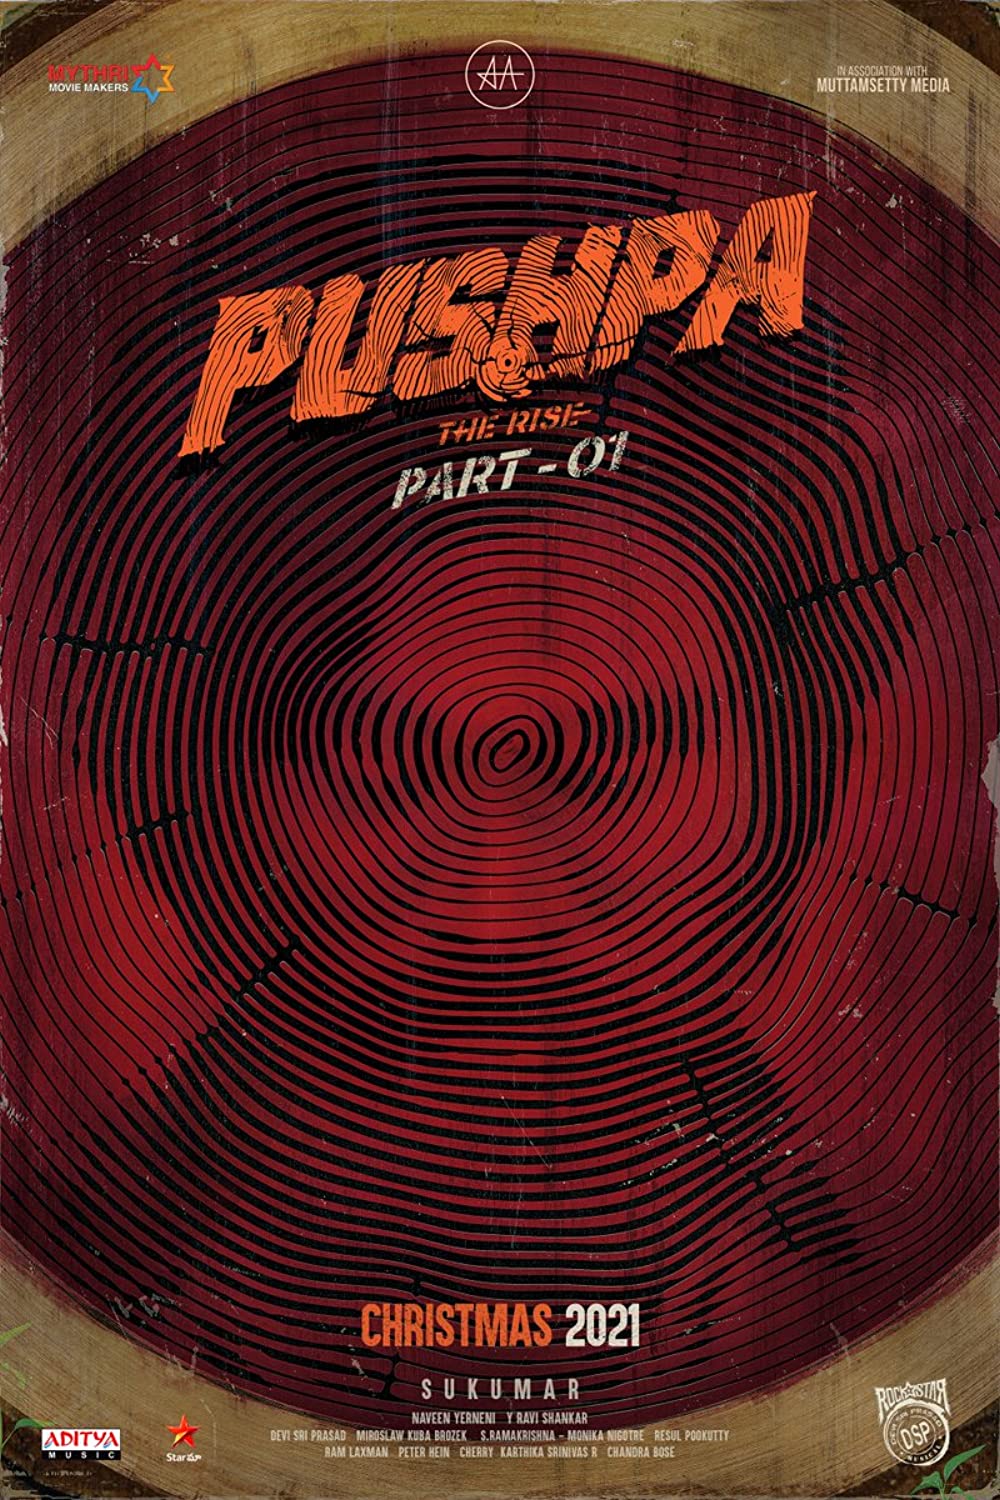 Pushpa The Rise 2021 Movie Wallpapers